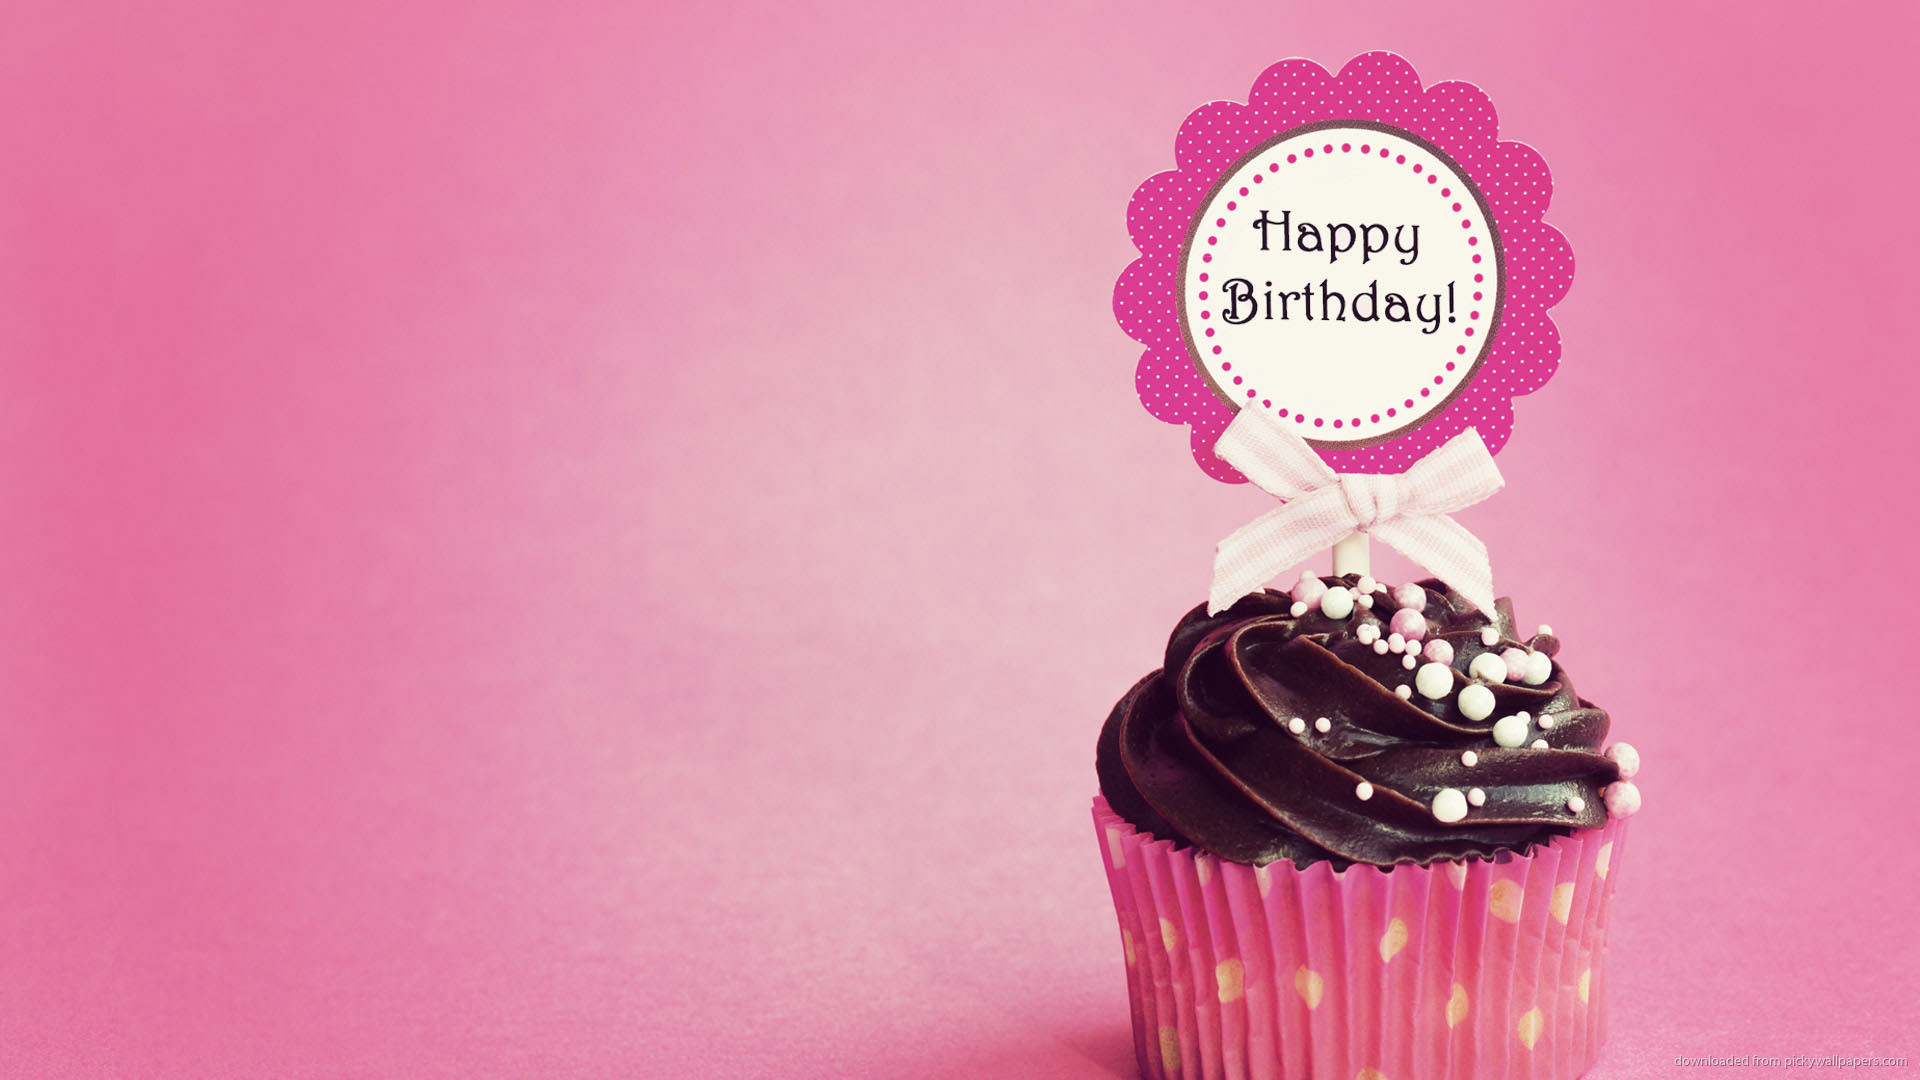 1920x1080 Cute Birthday Cake Wallpaper ~ Image Inspiration of Cake and .